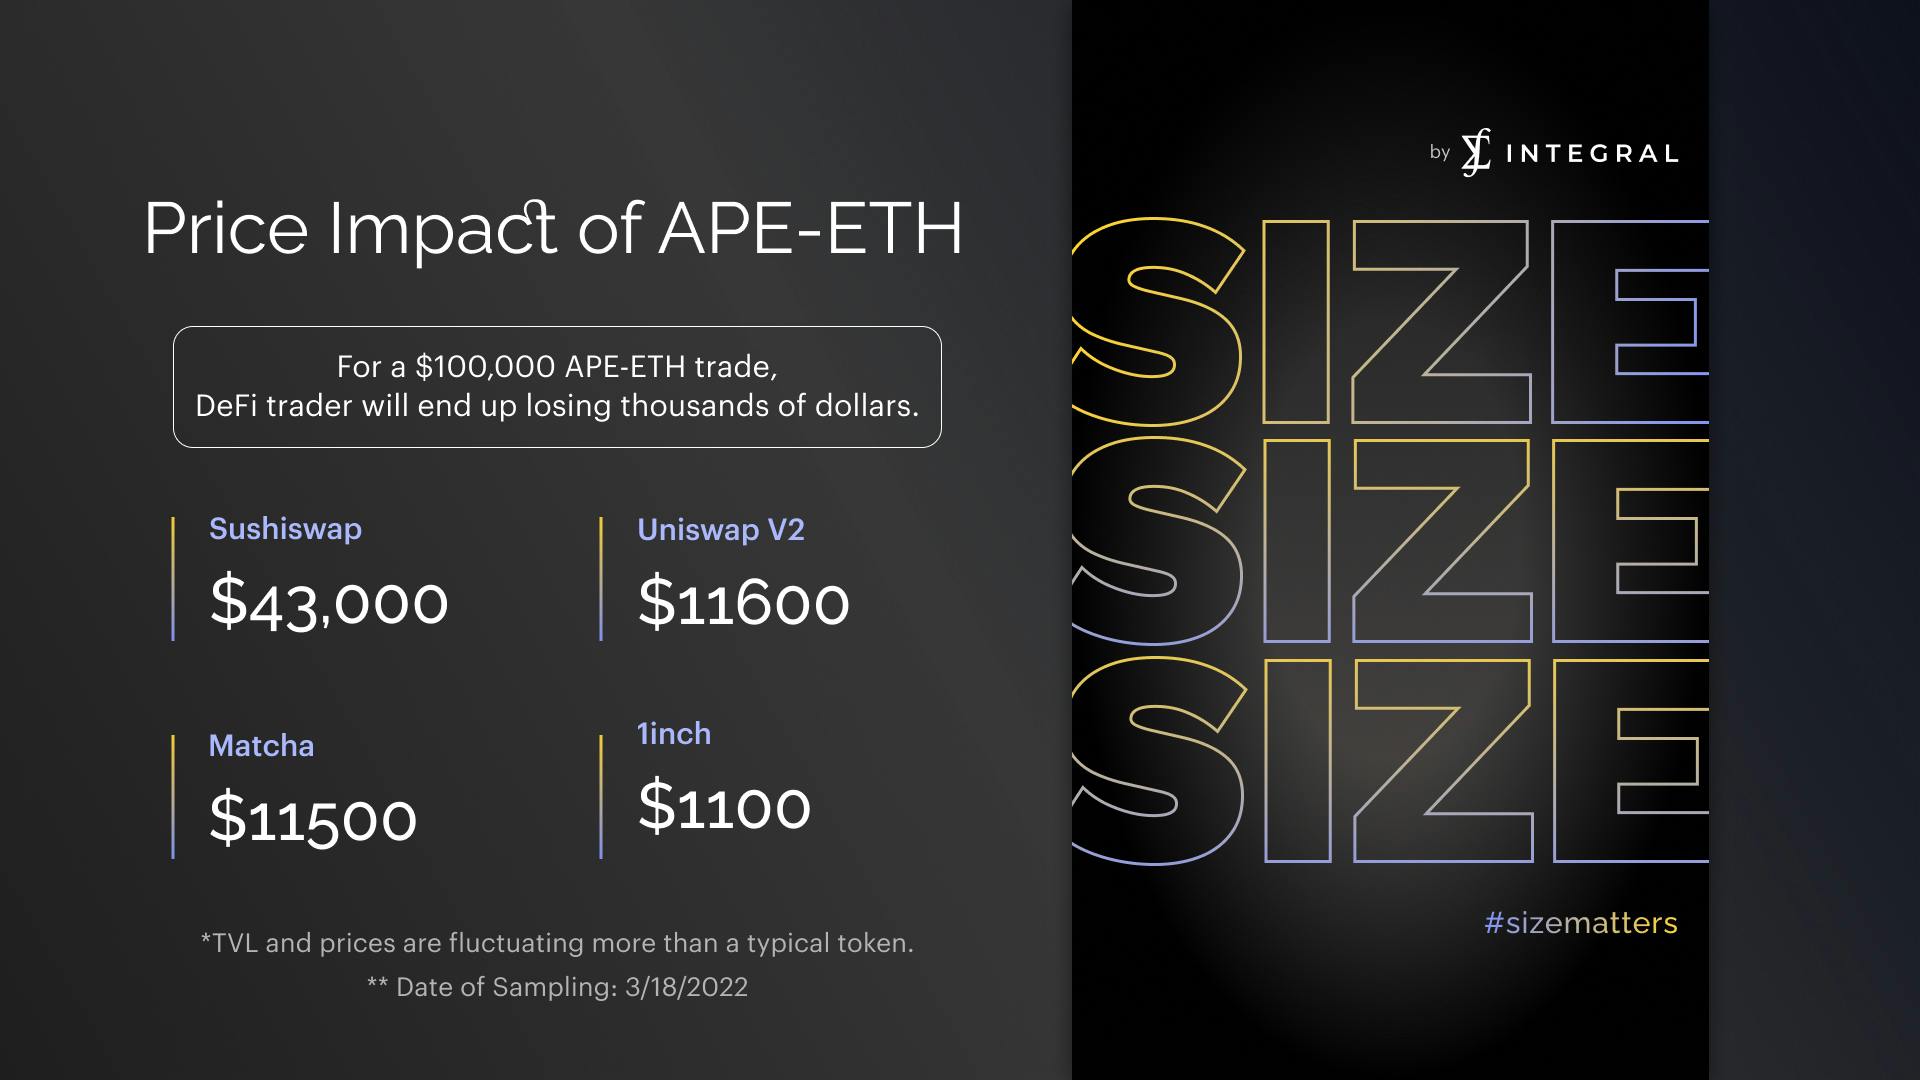 A $100,000 APE-ETH trade will experience tens of thousands of dollars loss due to price impact. With Integral SIZE, all these loss can be gone. 